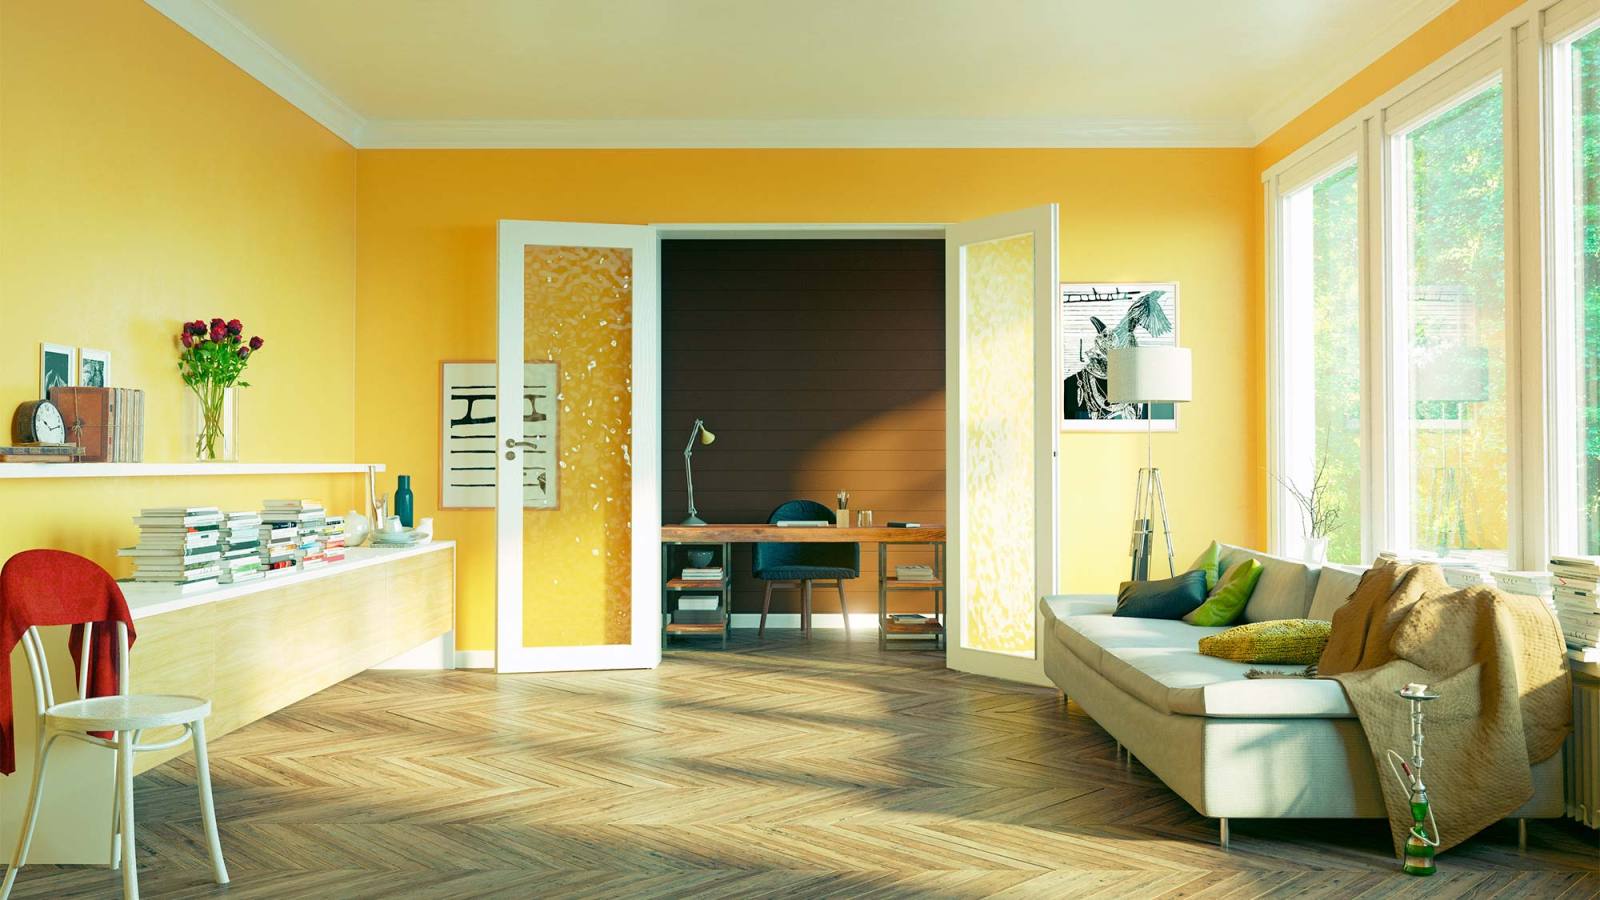 Living room painted in yellow.